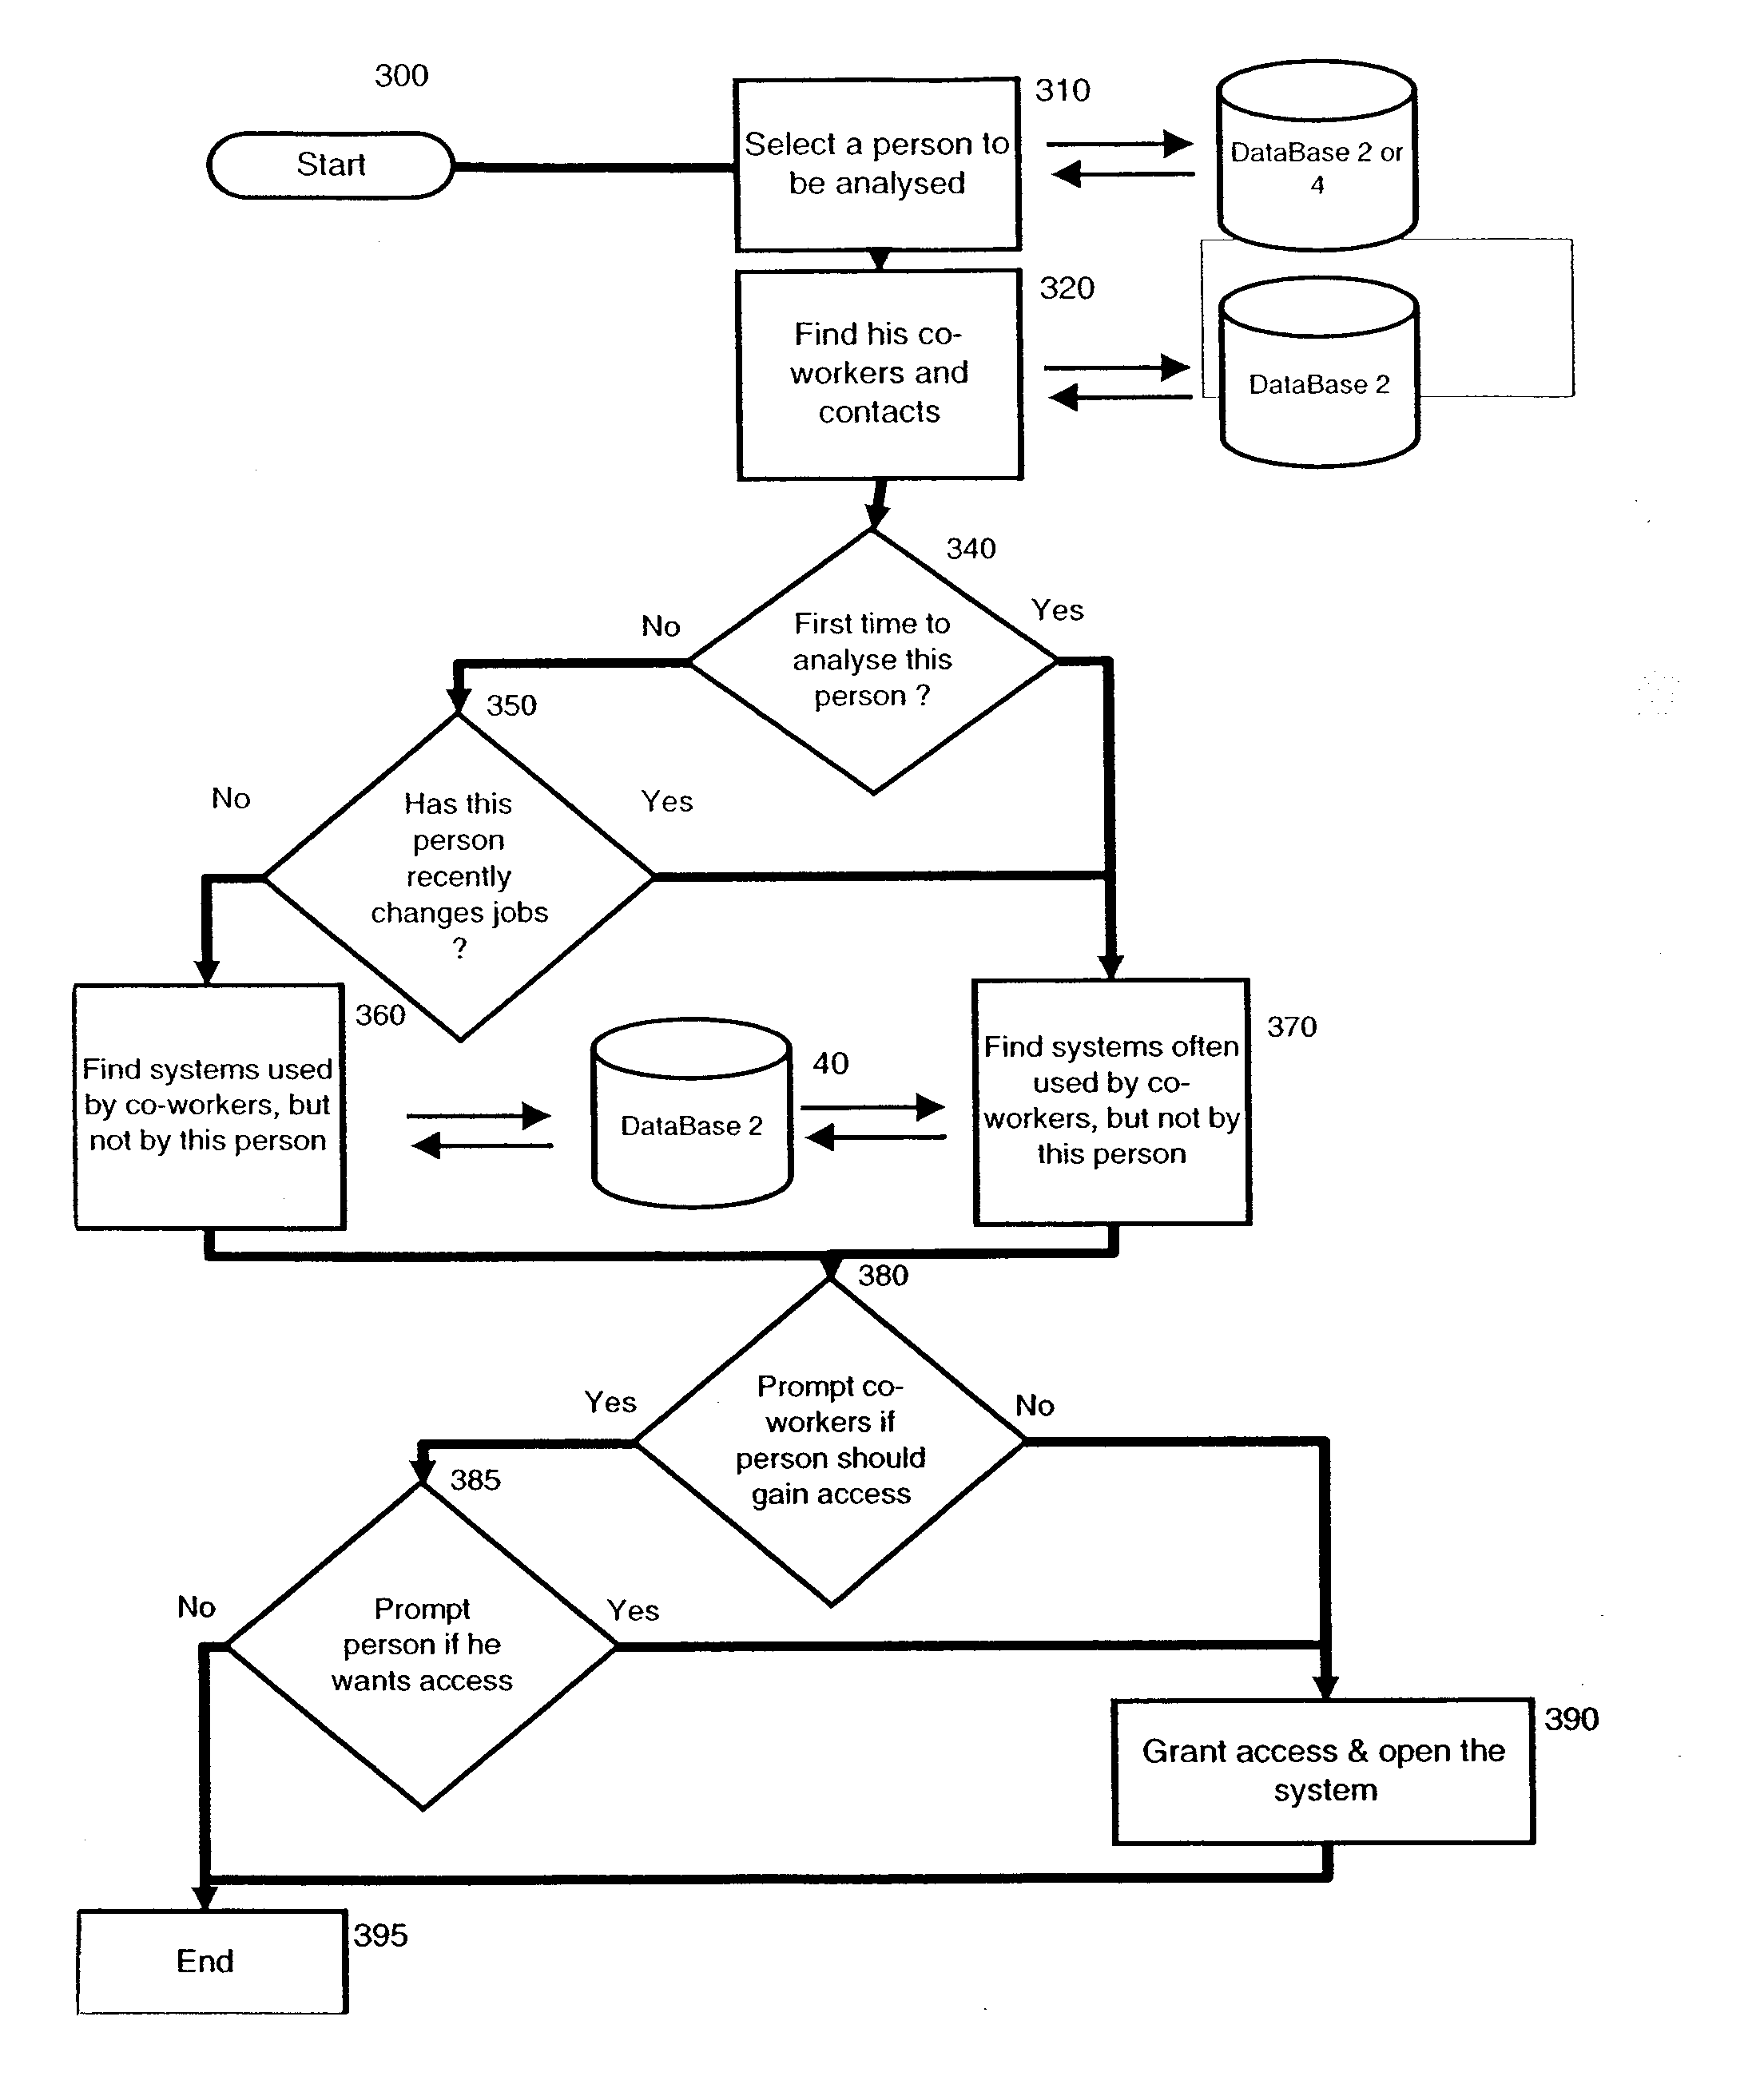 Apparatus and method for analysis of conversational patterns to position information and autonomic access control list management